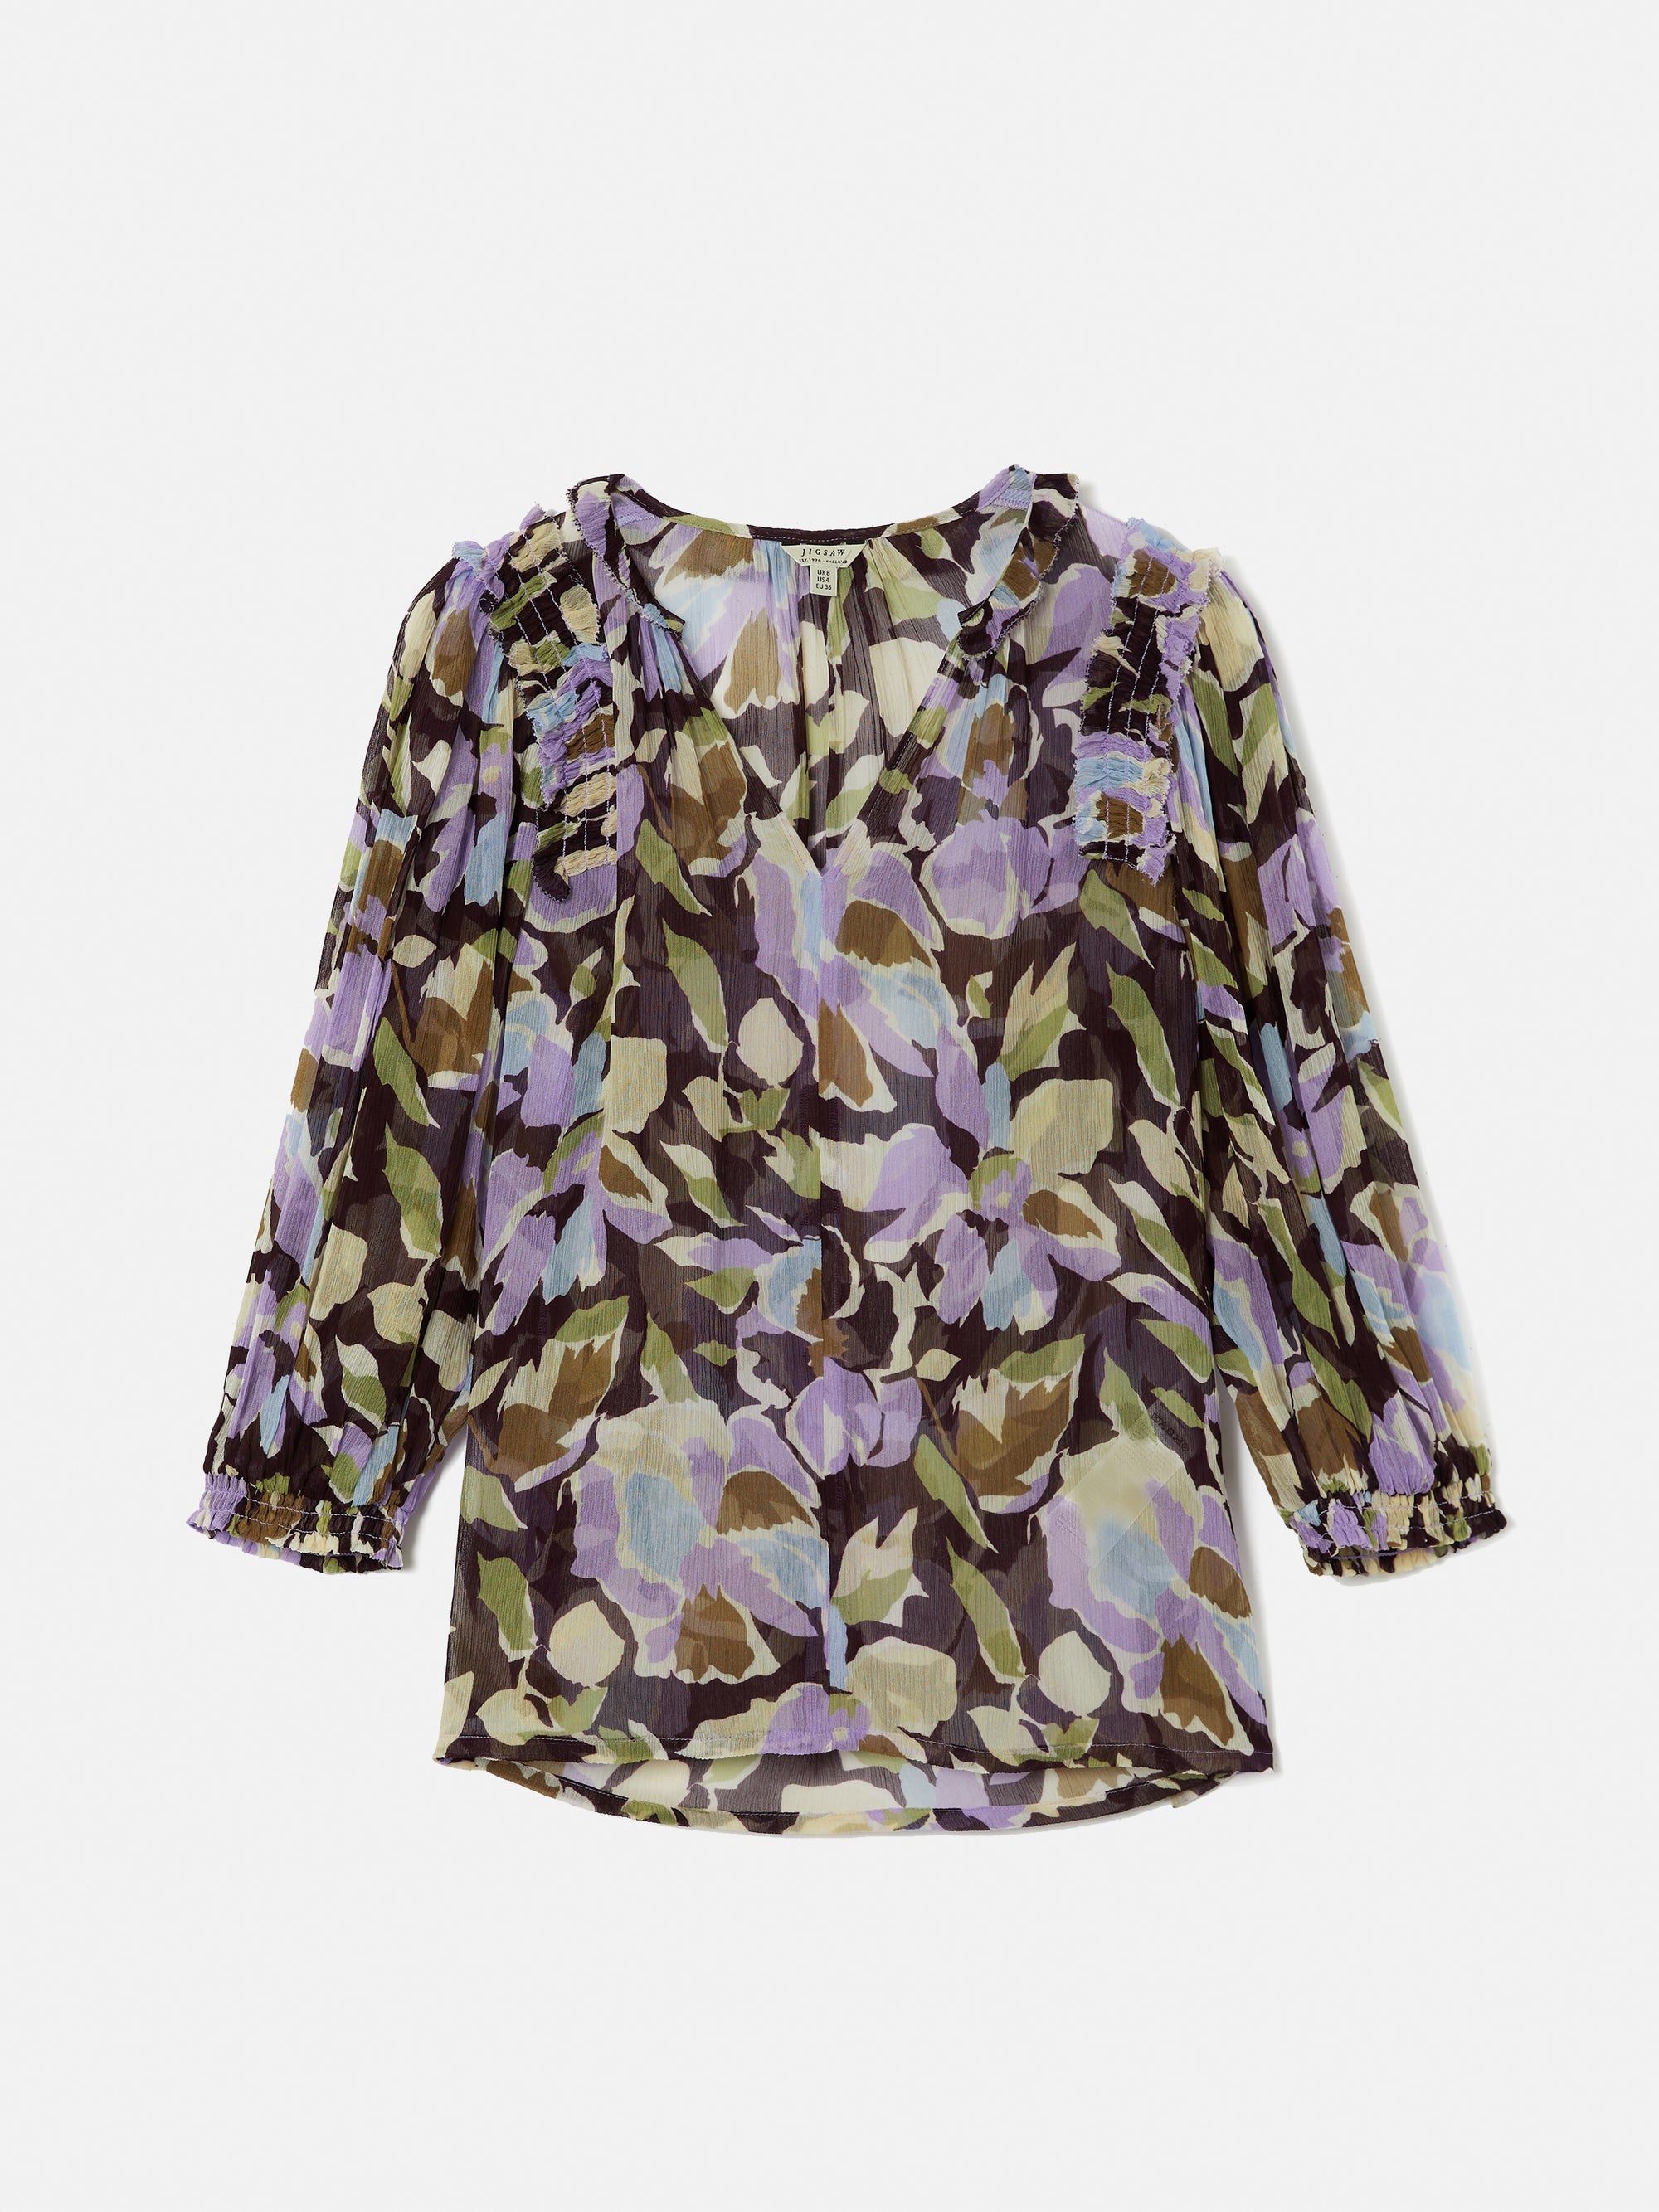 Best women's blouses to shop now